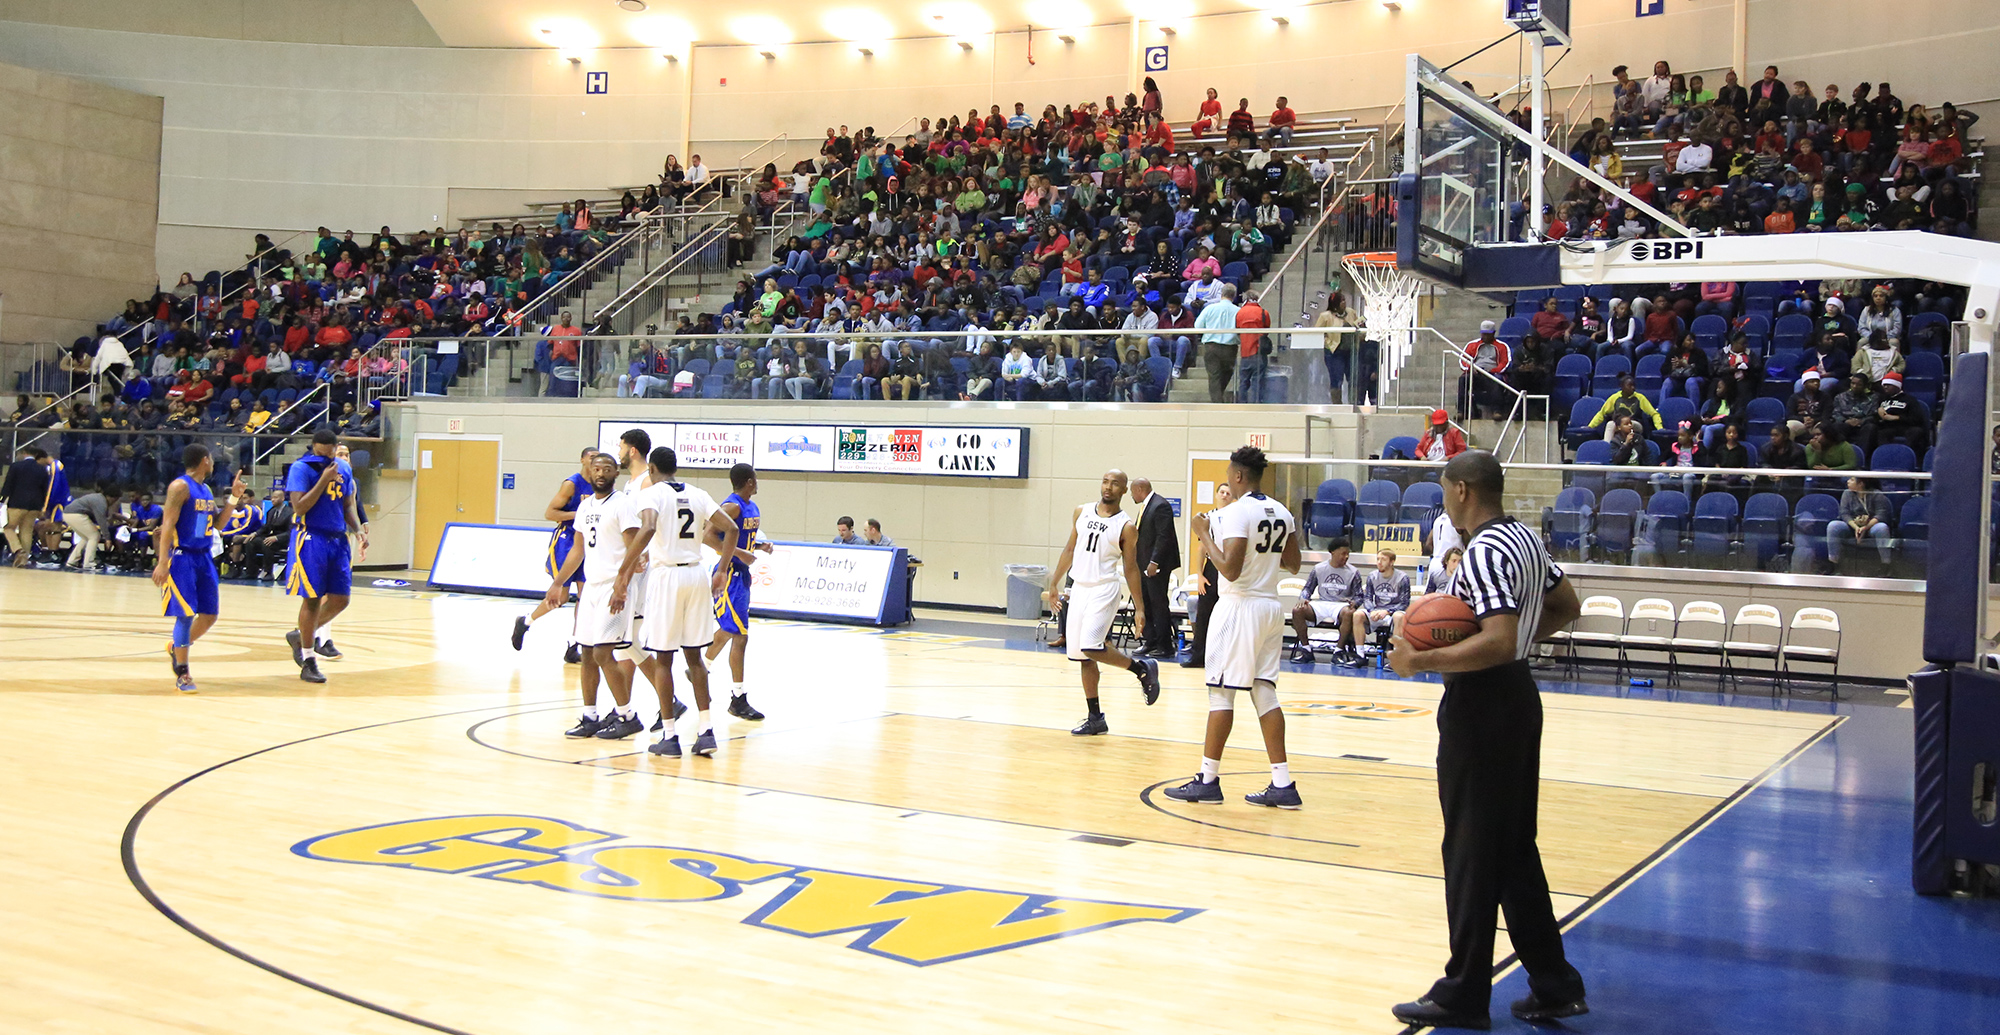 GSW Rallies For Win In Packed Storm Dome